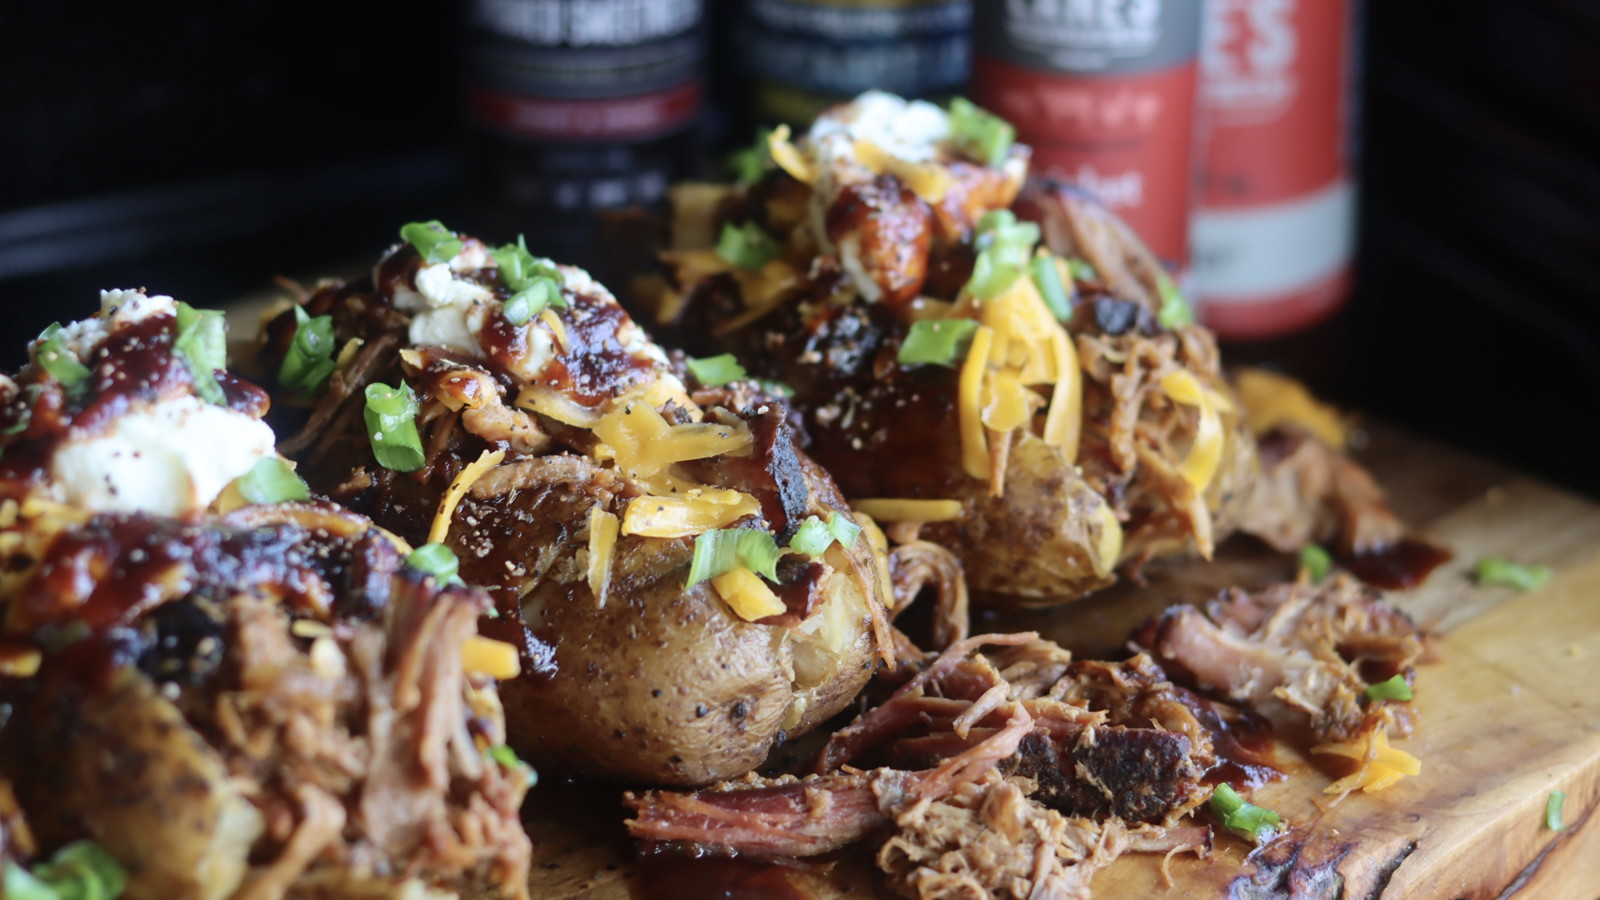 Image of Weekday Pork Butt & Loaded Baked Potatoes